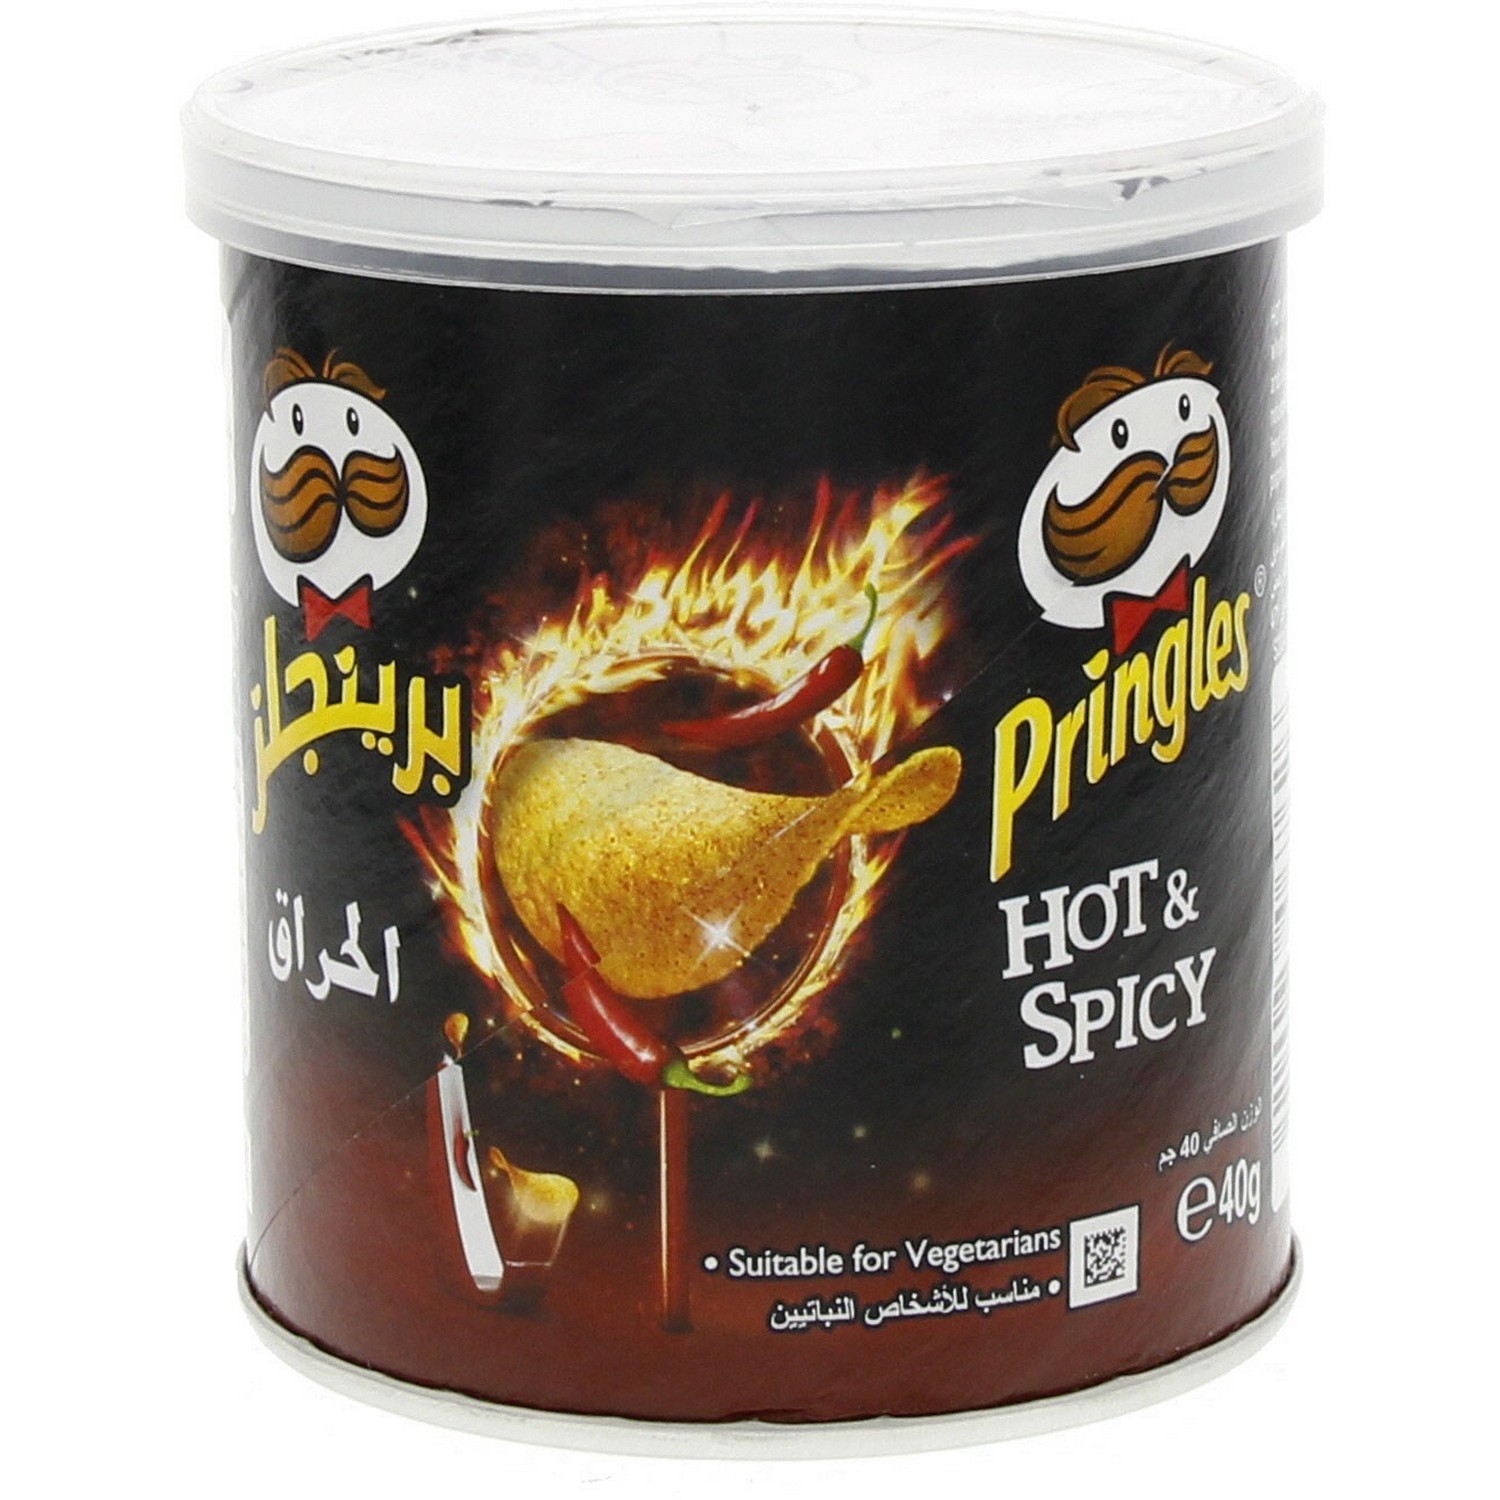 Pringles Hot & Spicy Chips 40g x 1 pc - My247Mart |1ST HALAL STORE WORLDWIDE